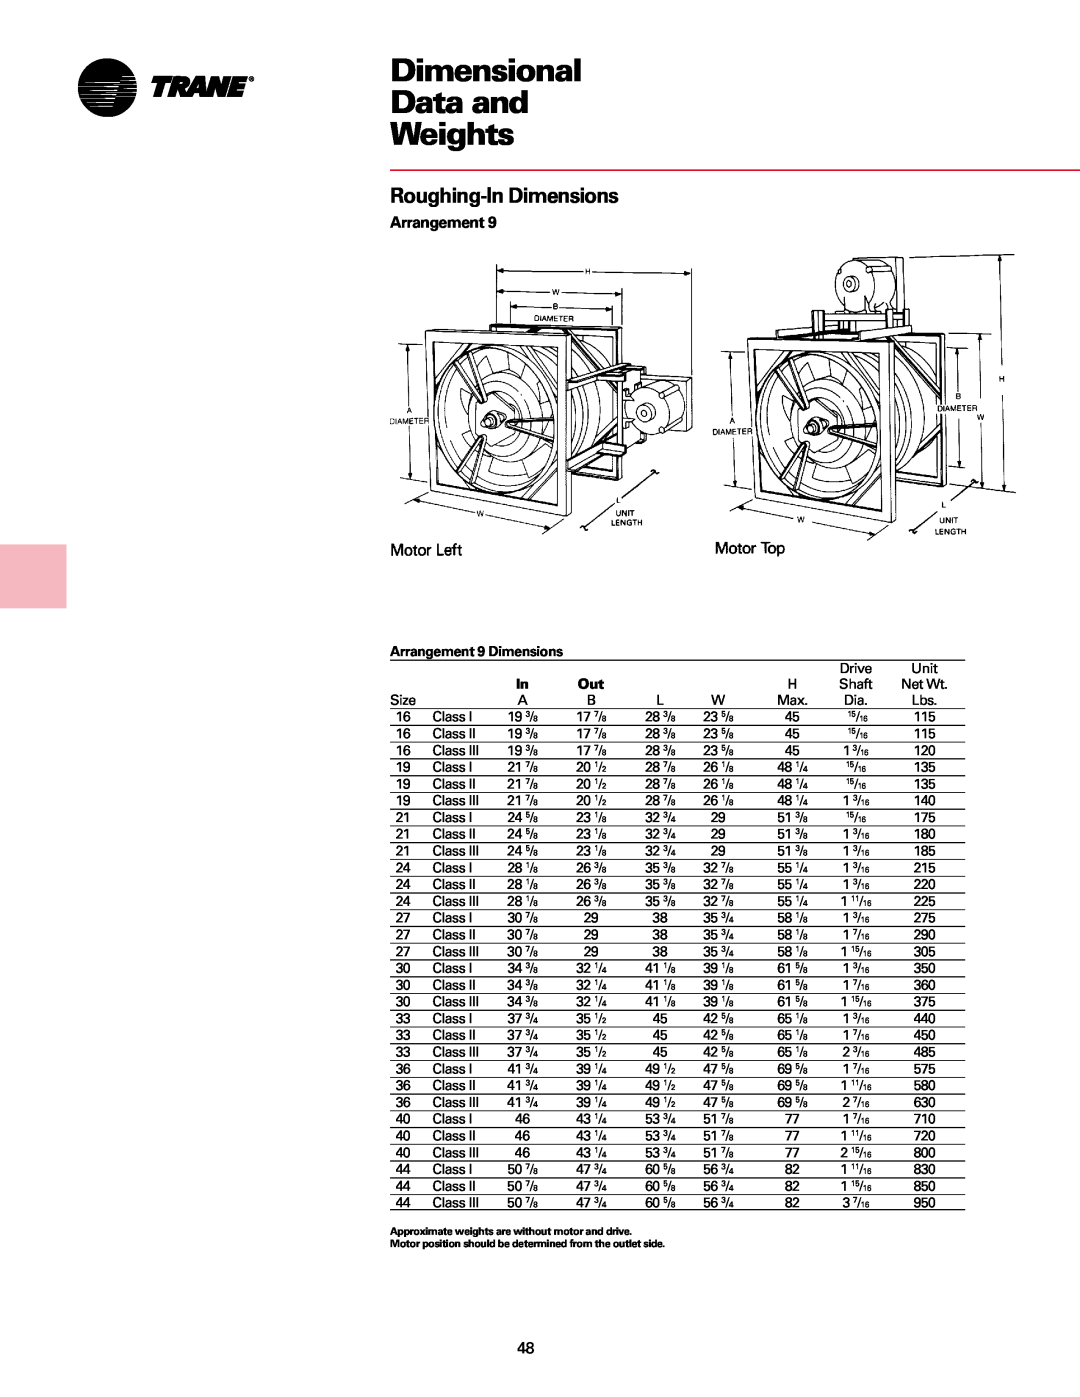 Trane Fan manual Dimensional Data and Weights, Roughing-InDimensions, Arrangement 